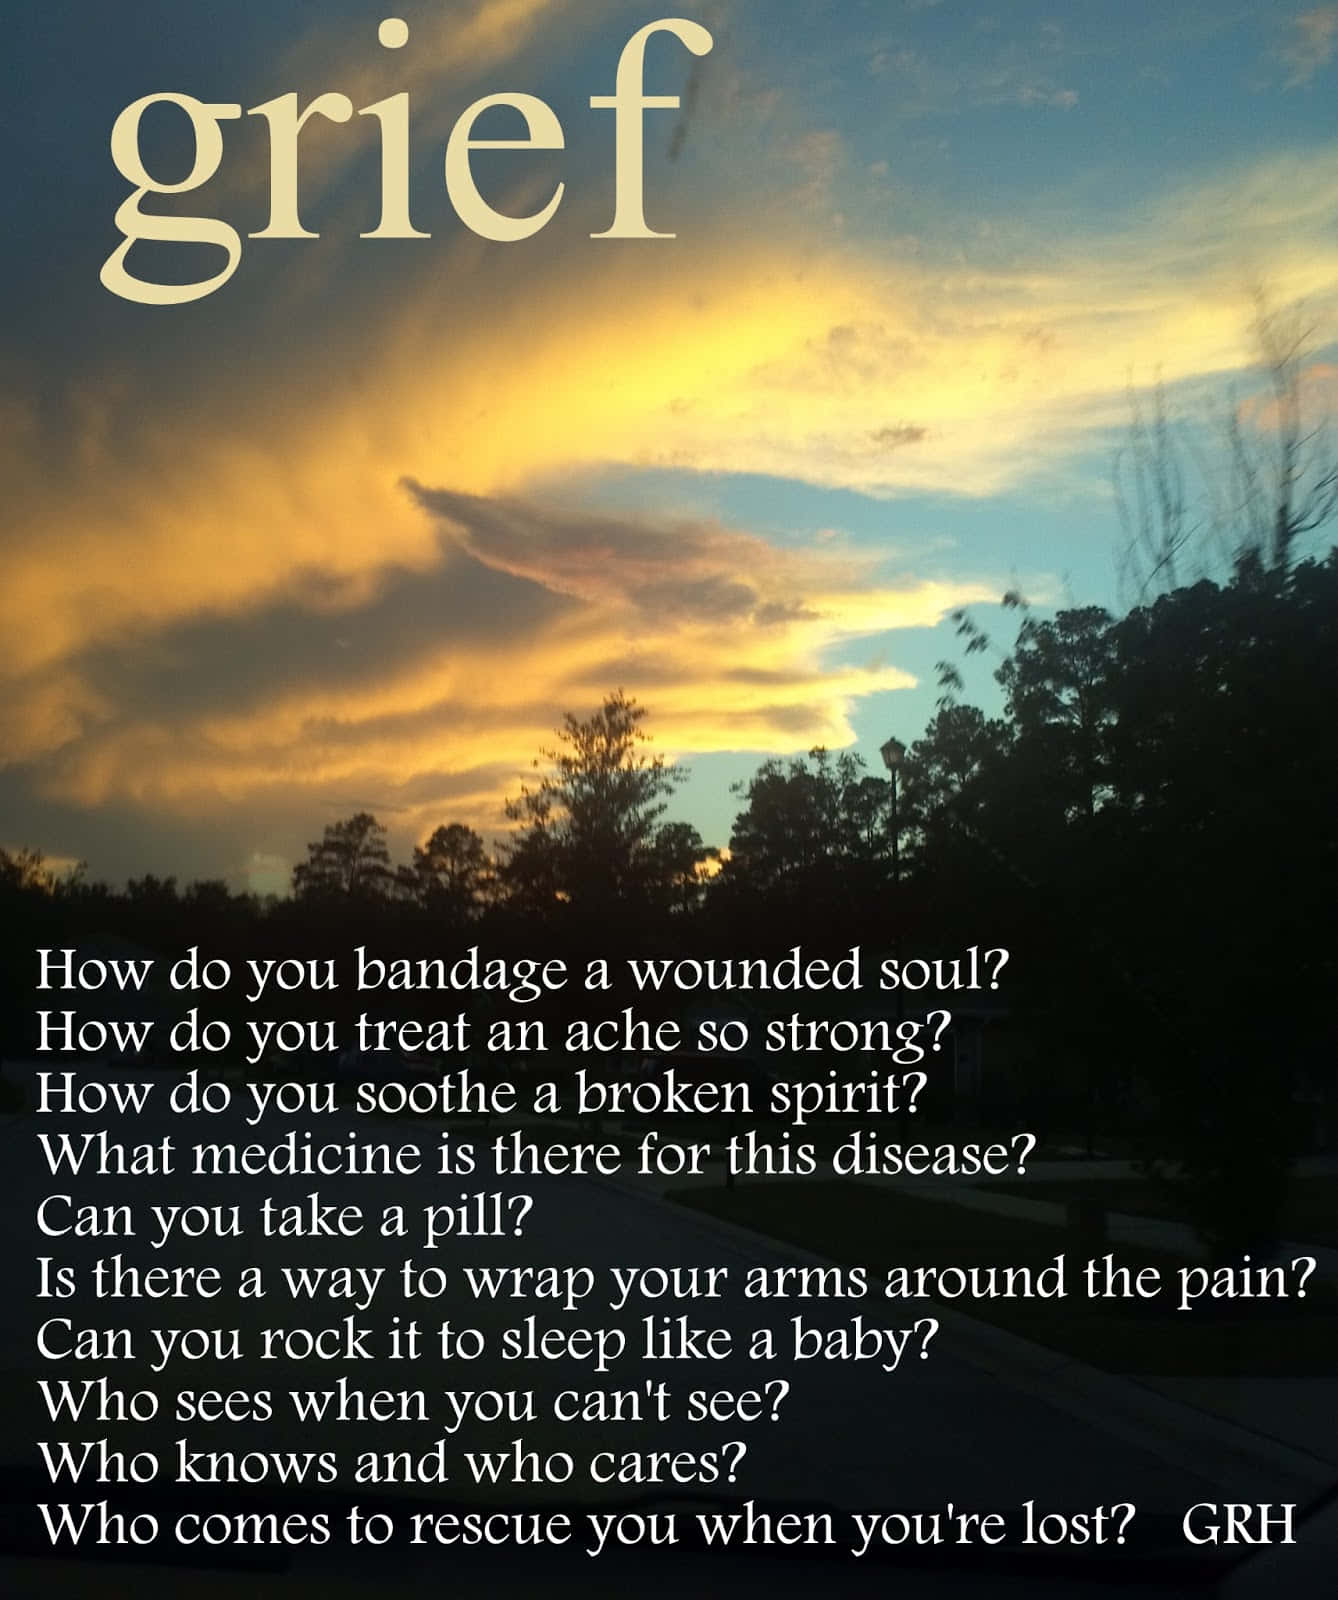 Discovering the courage to move through grief